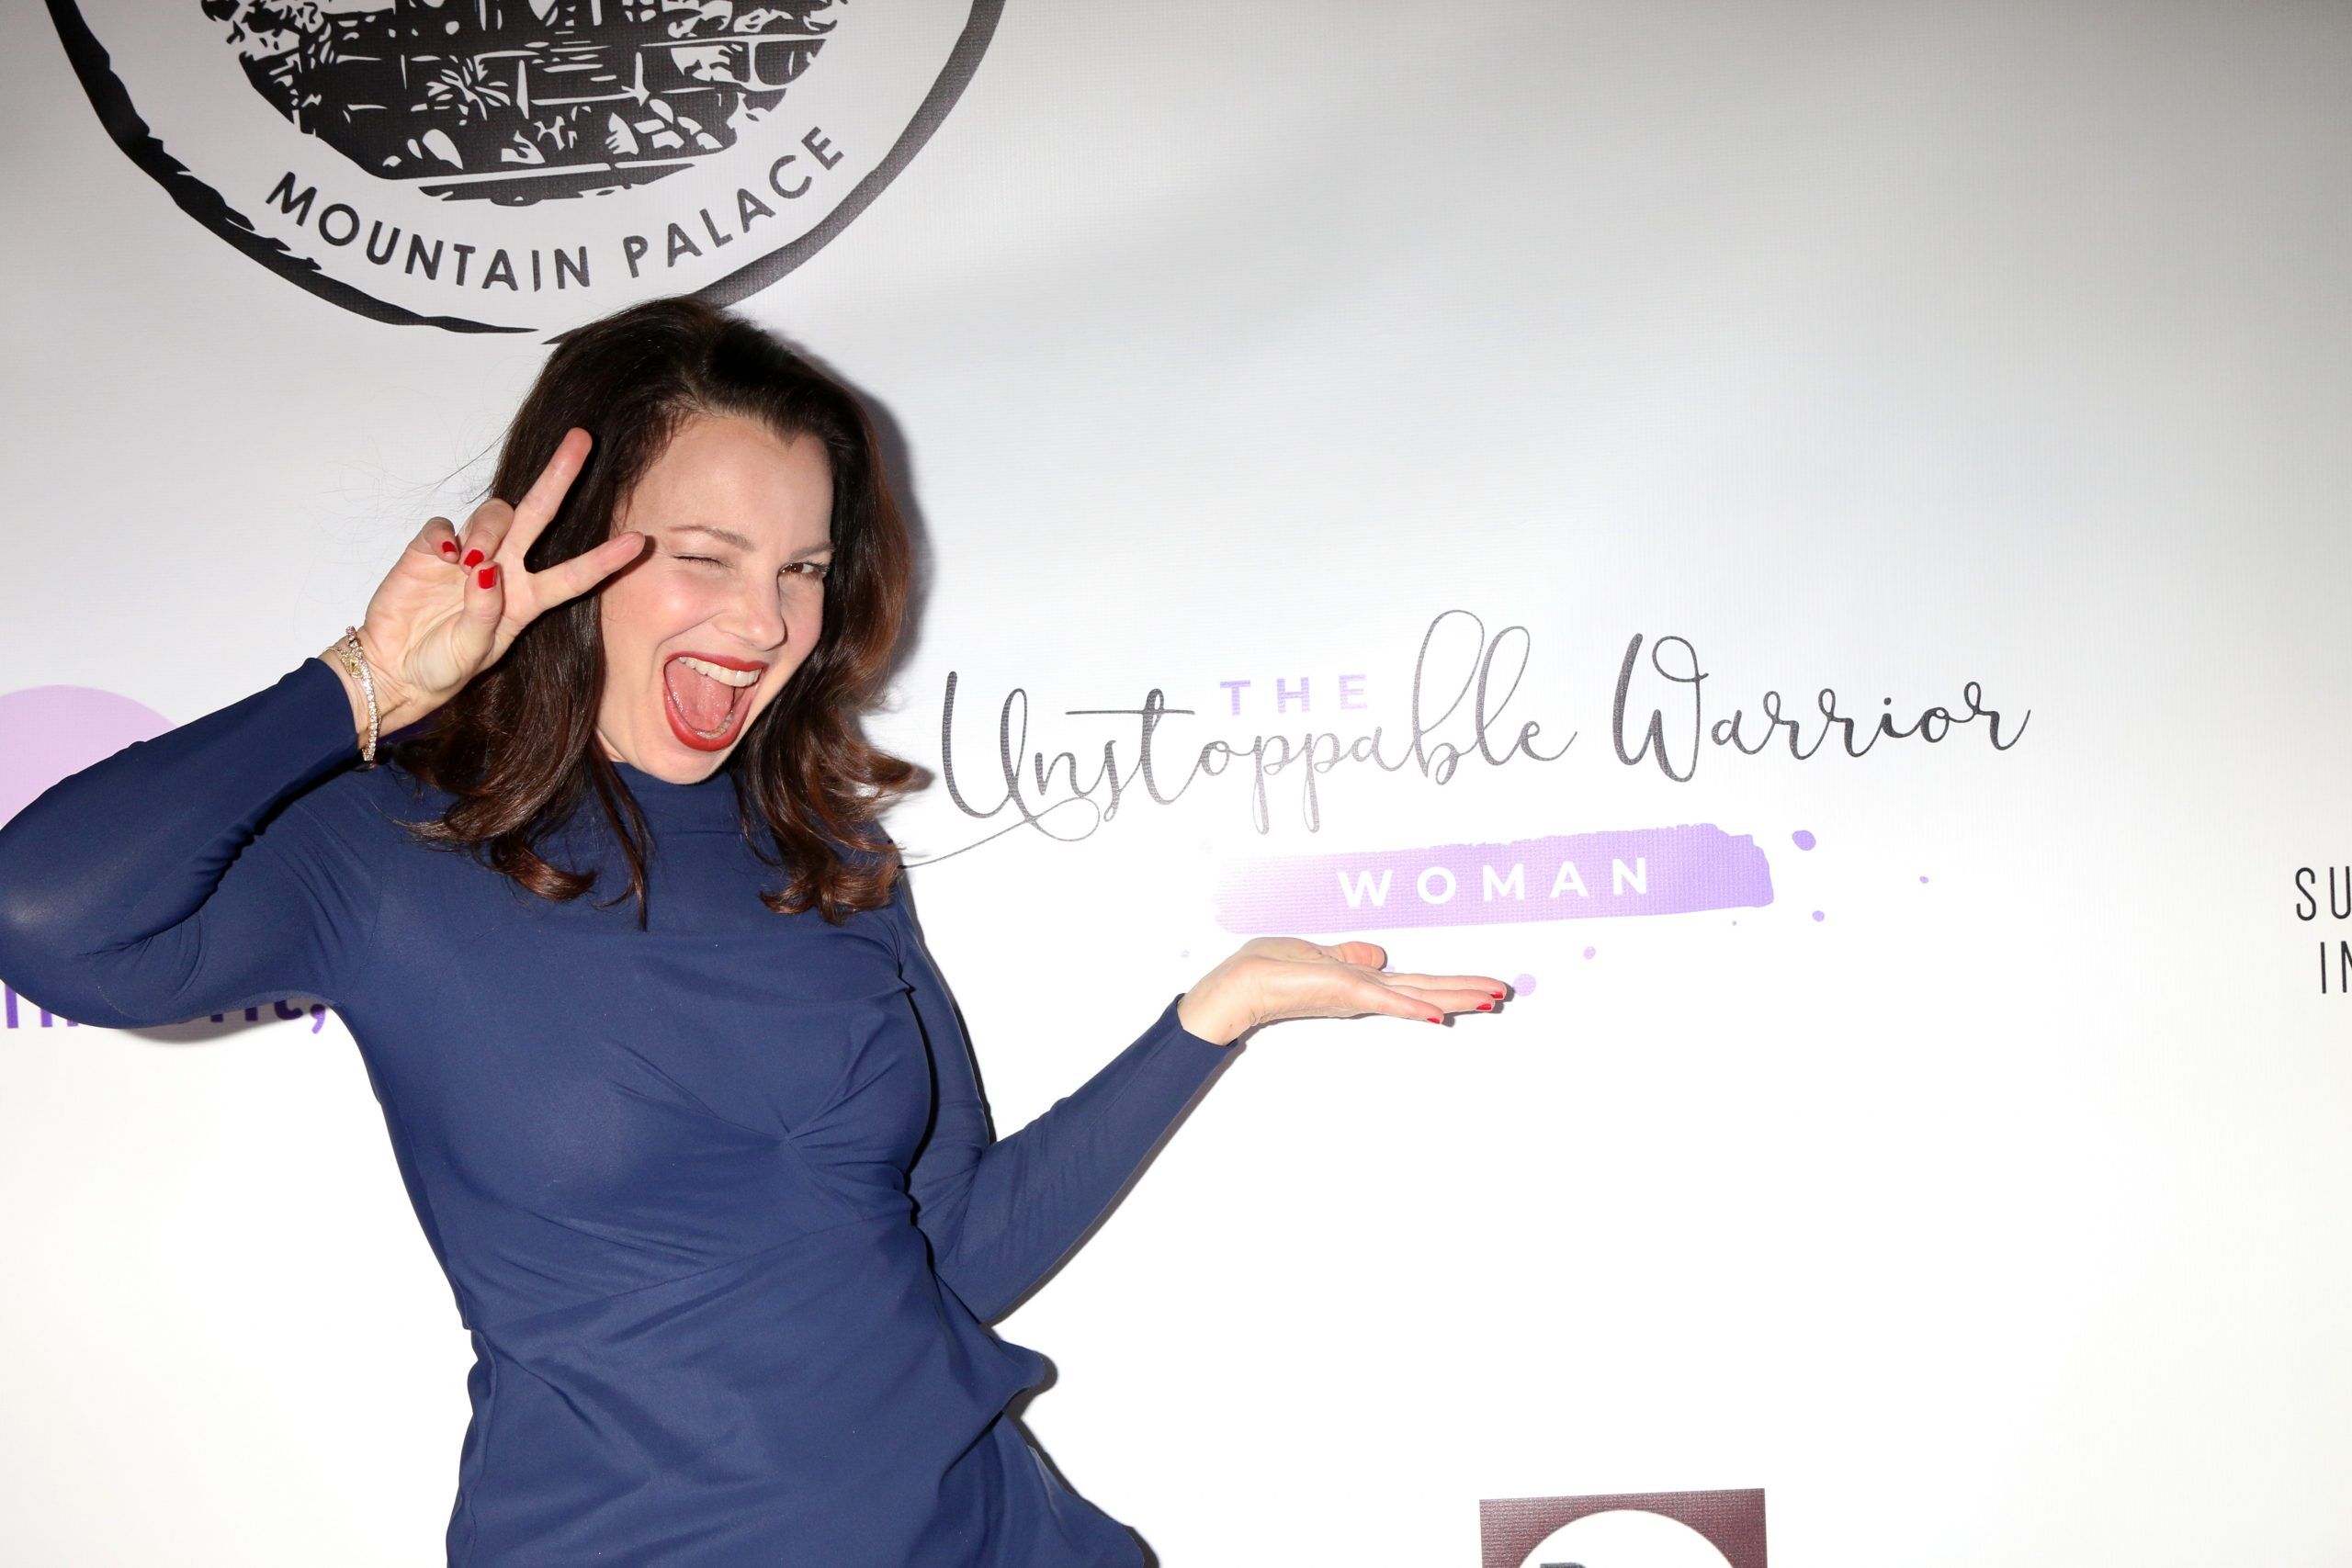 Fran Drescher at the Women Empowering Women - The Unstoppable Warrior event on October 16, 2018 in Los Angeles, CA